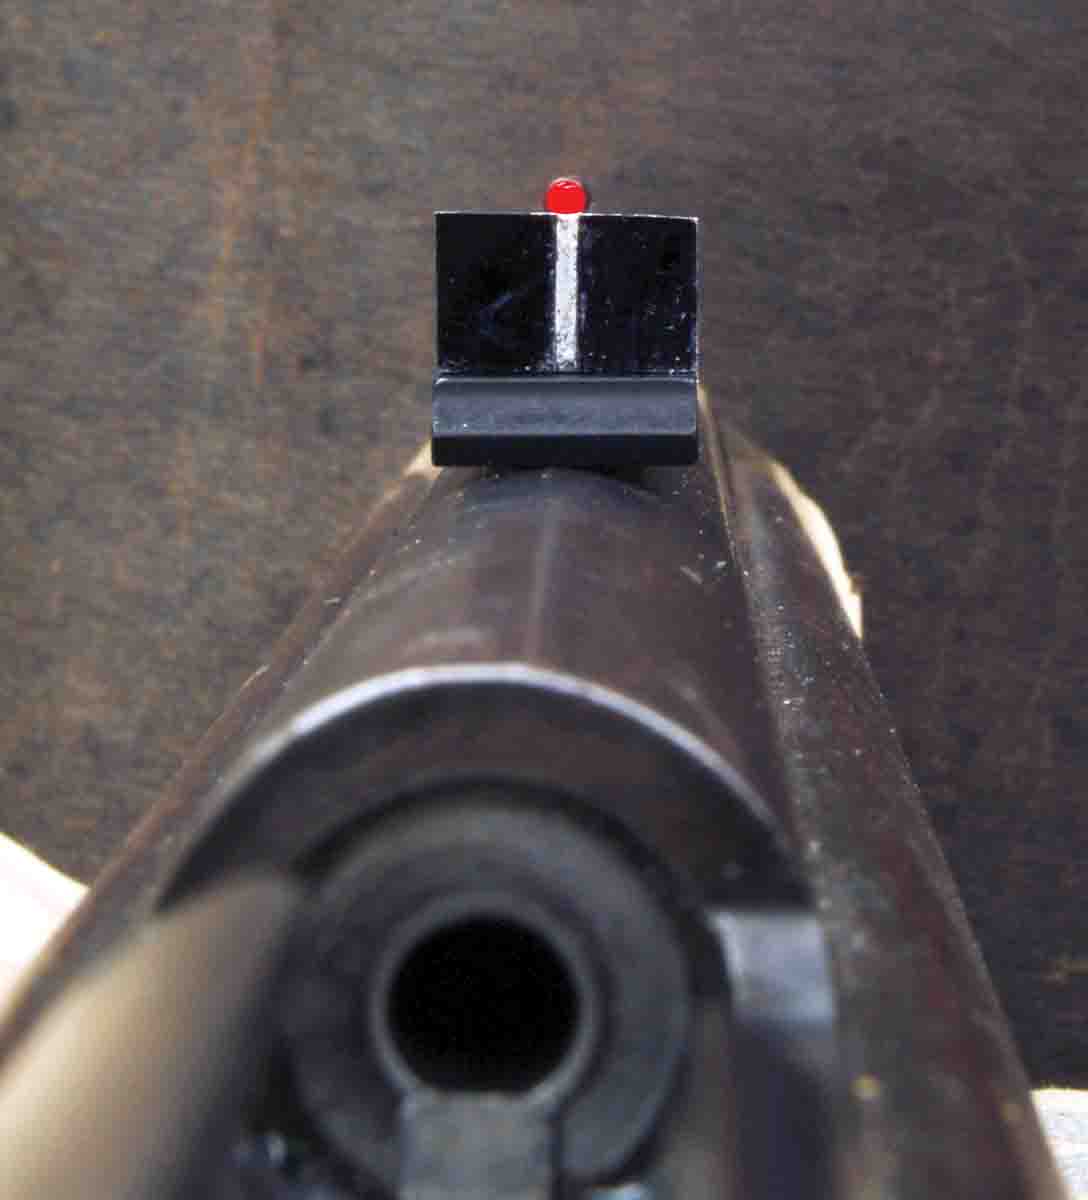 Sight picture on black background of the Fire Sight and WGS rear.